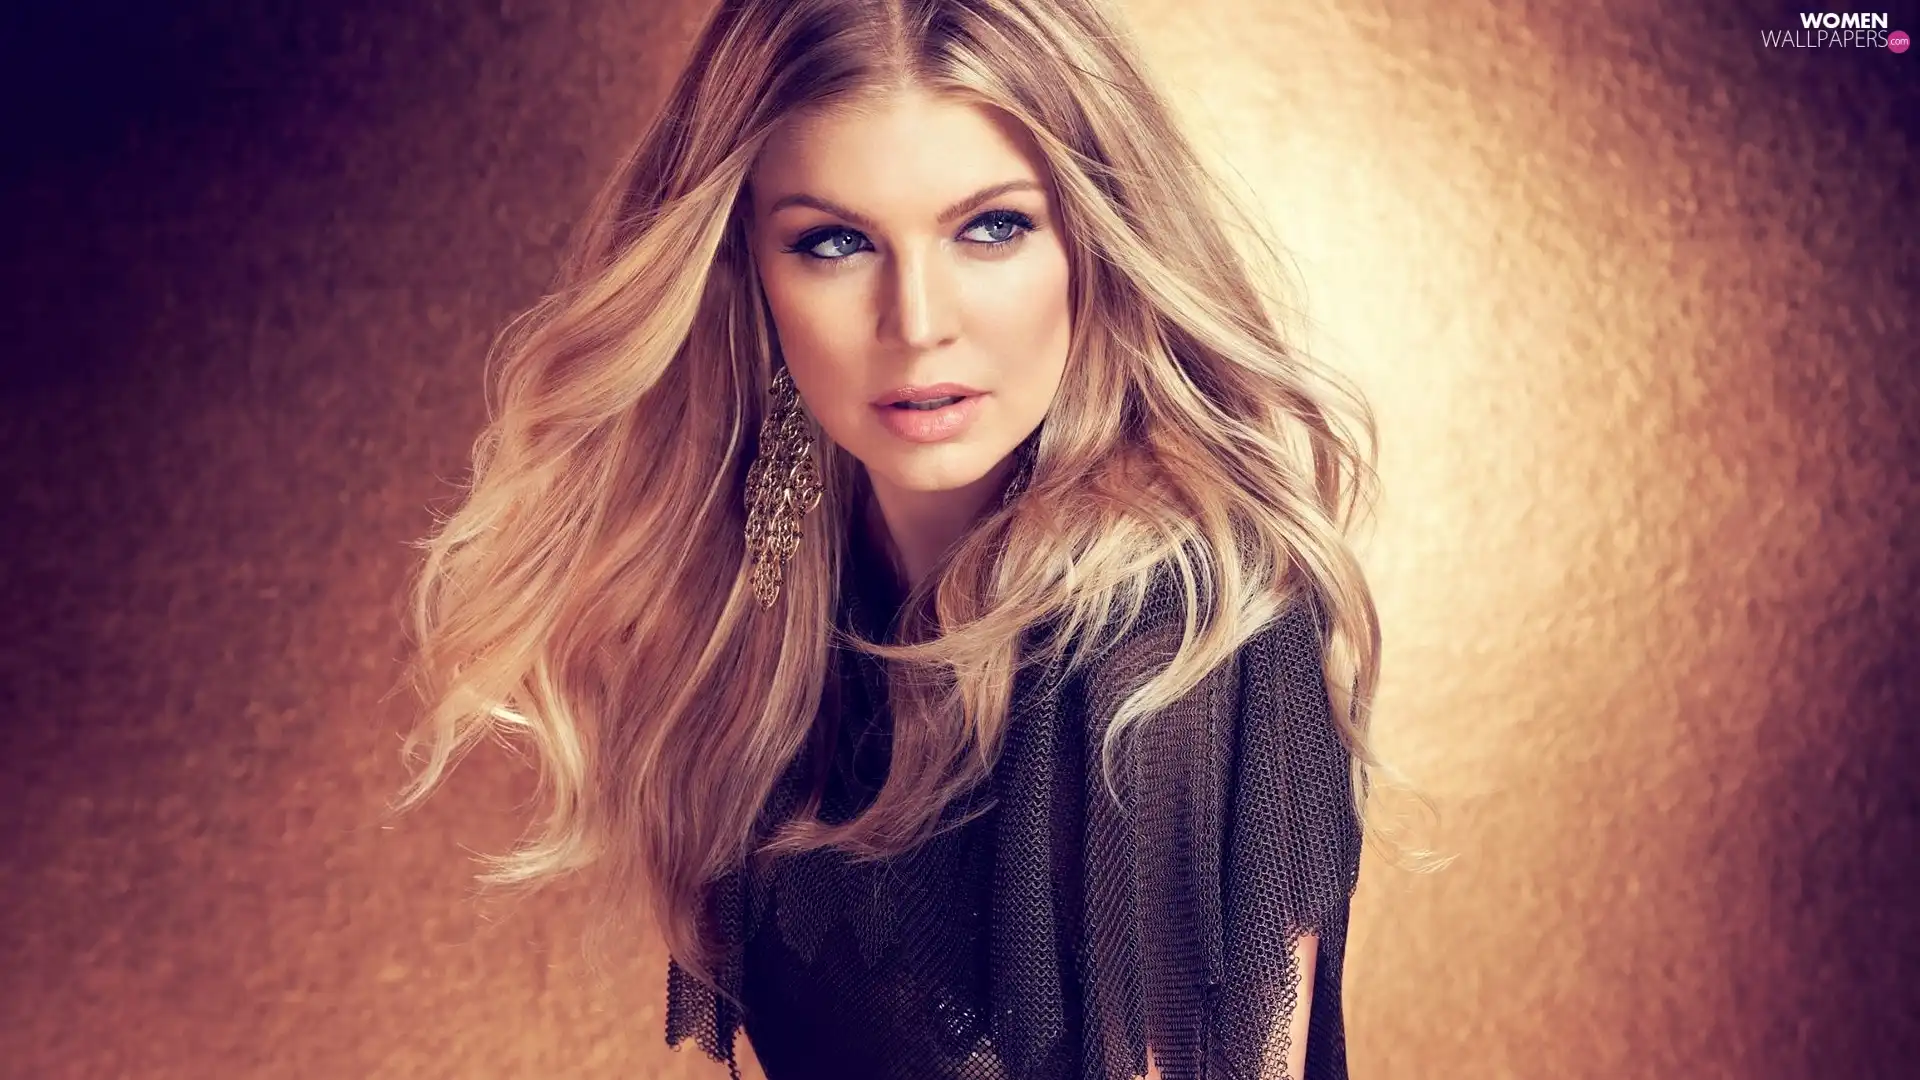 songster, Fergie, American